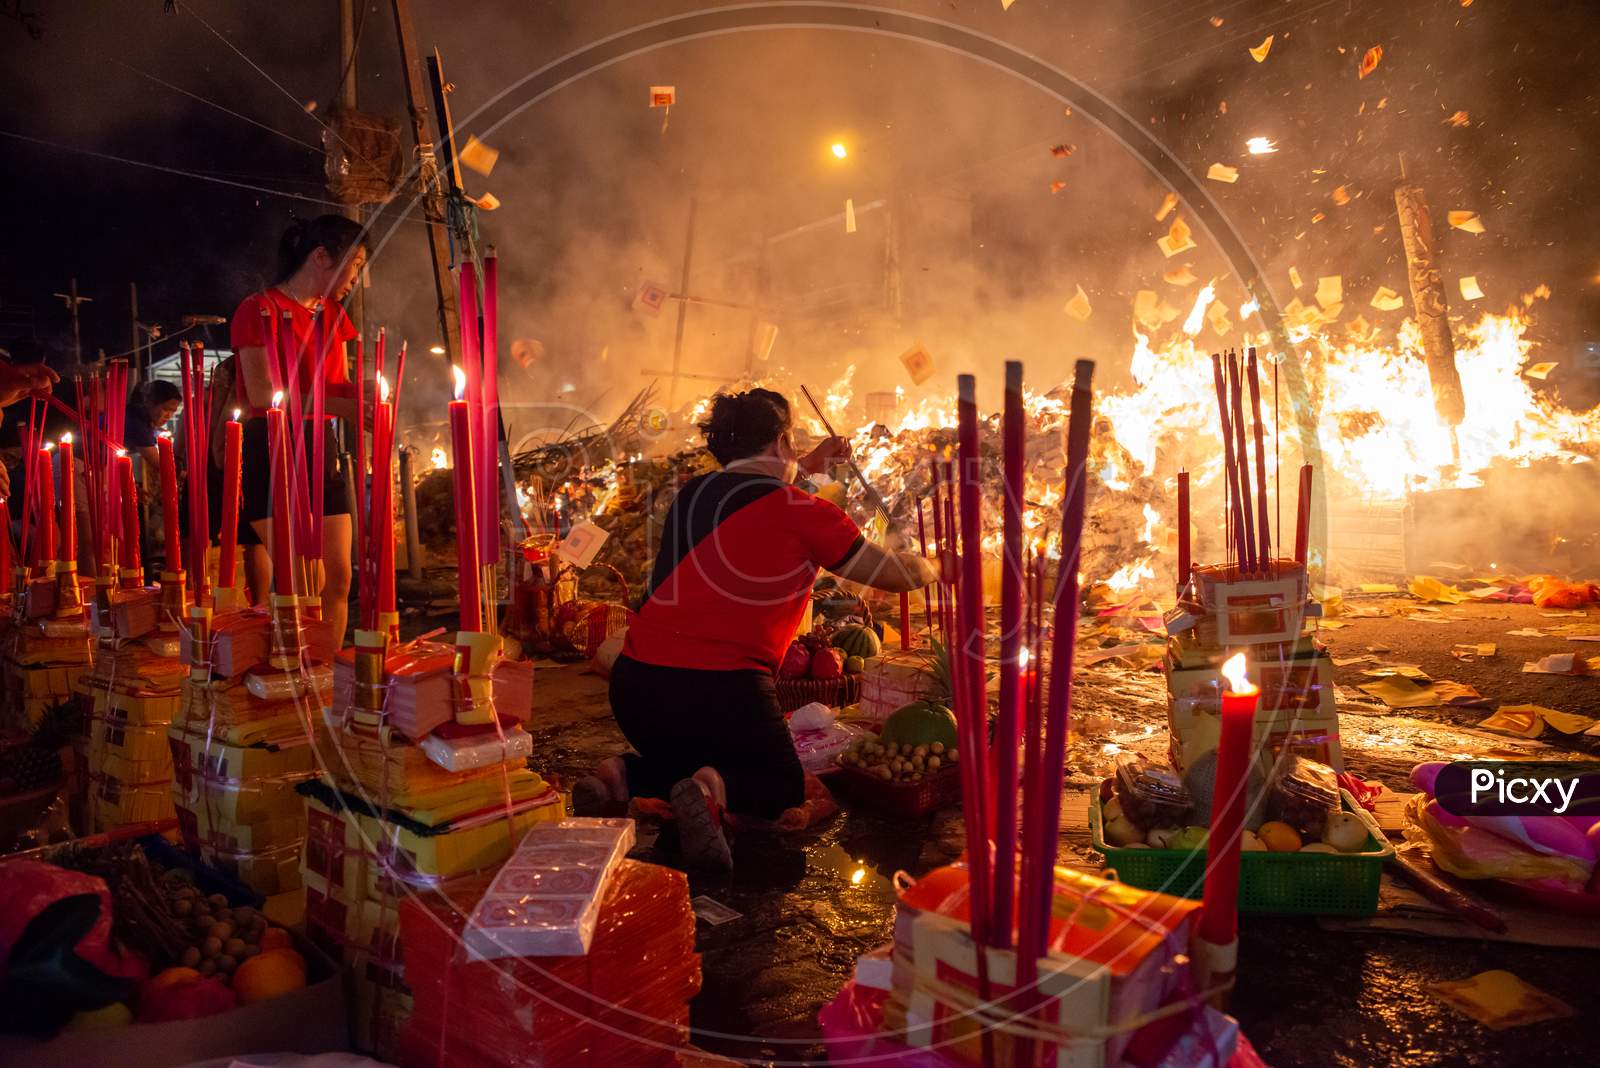 Chinese Devotees Pray With Joss Paper And Stick During Hungry Ghost Festival